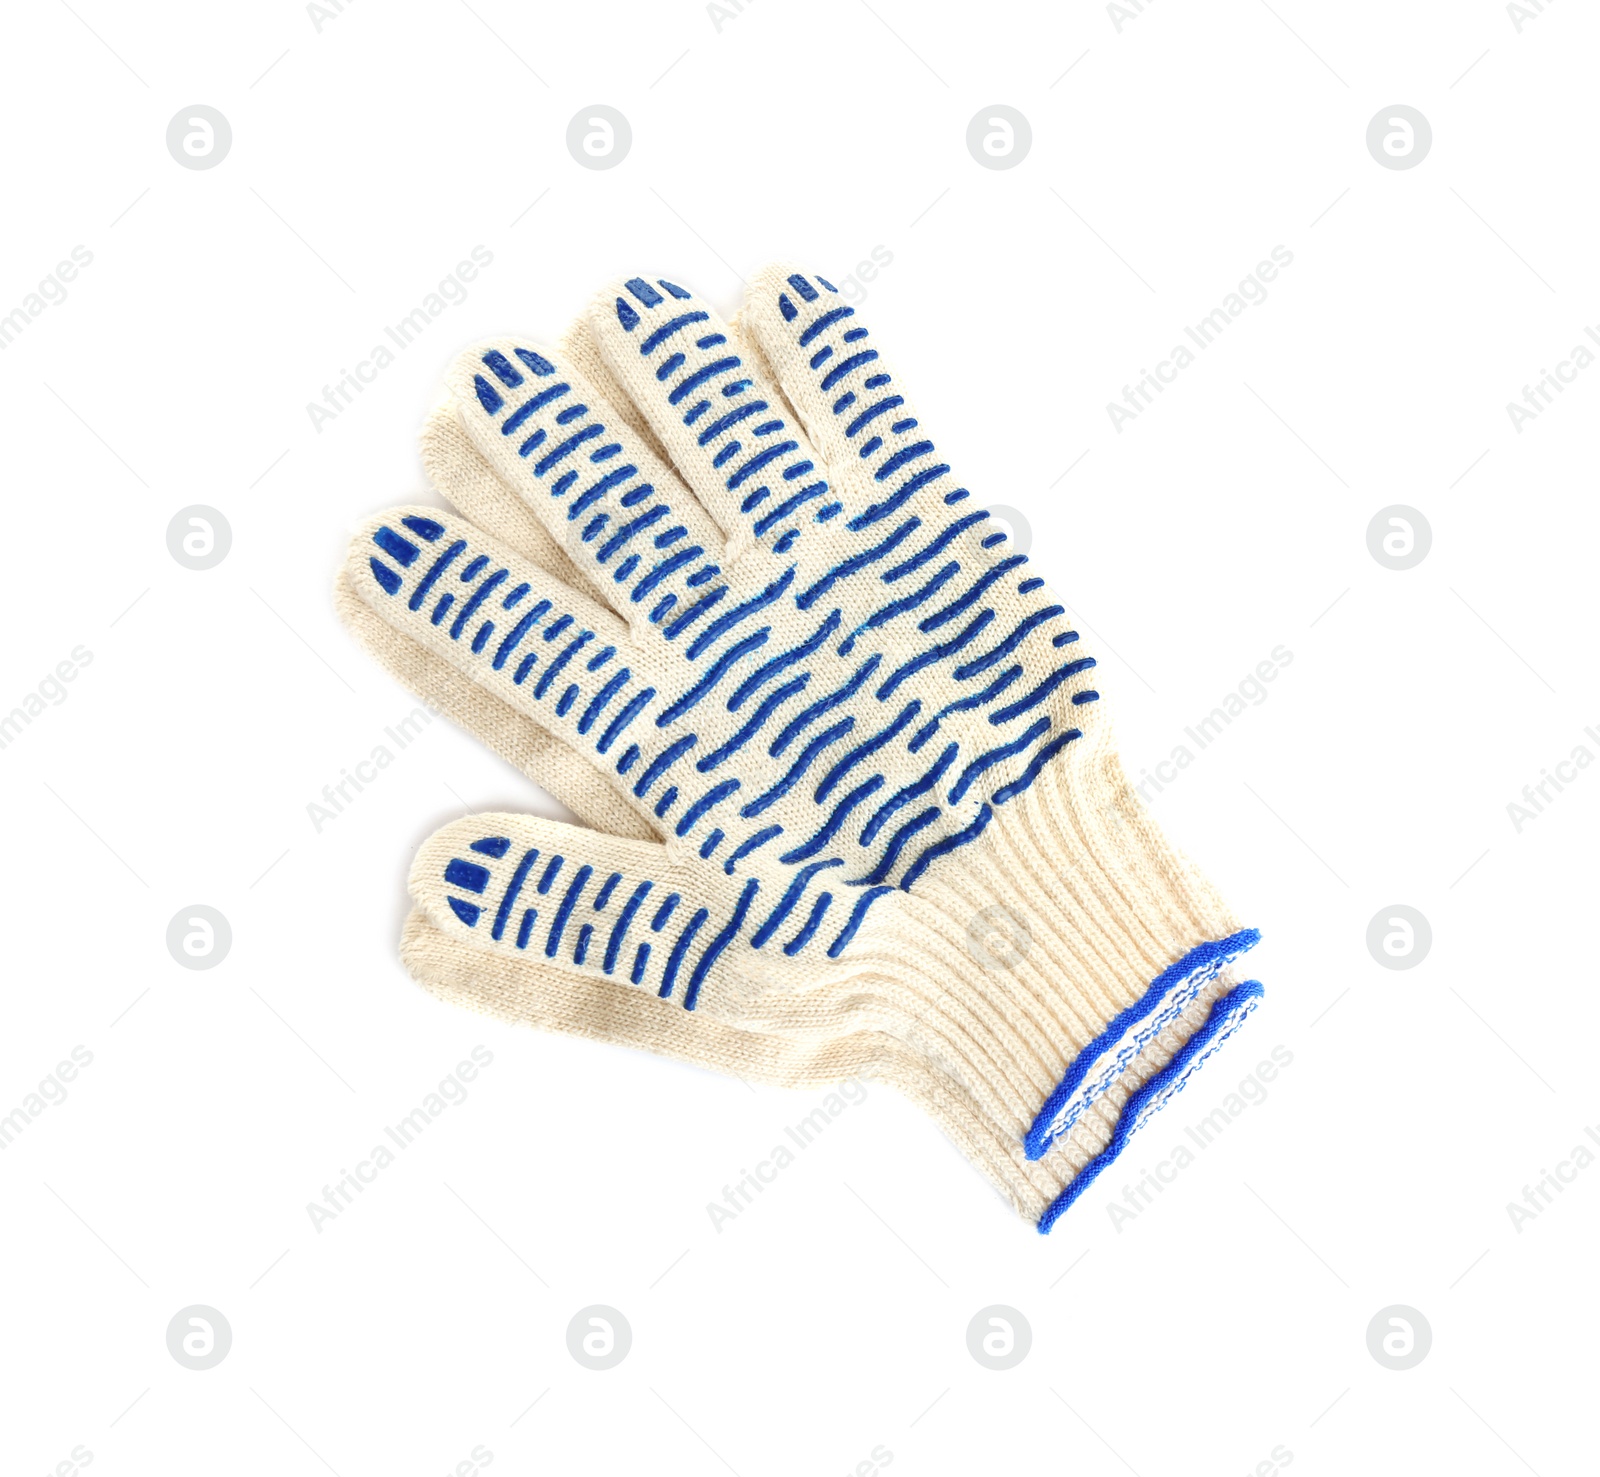 Photo of Protective gloves on white background, top view. Construction tools